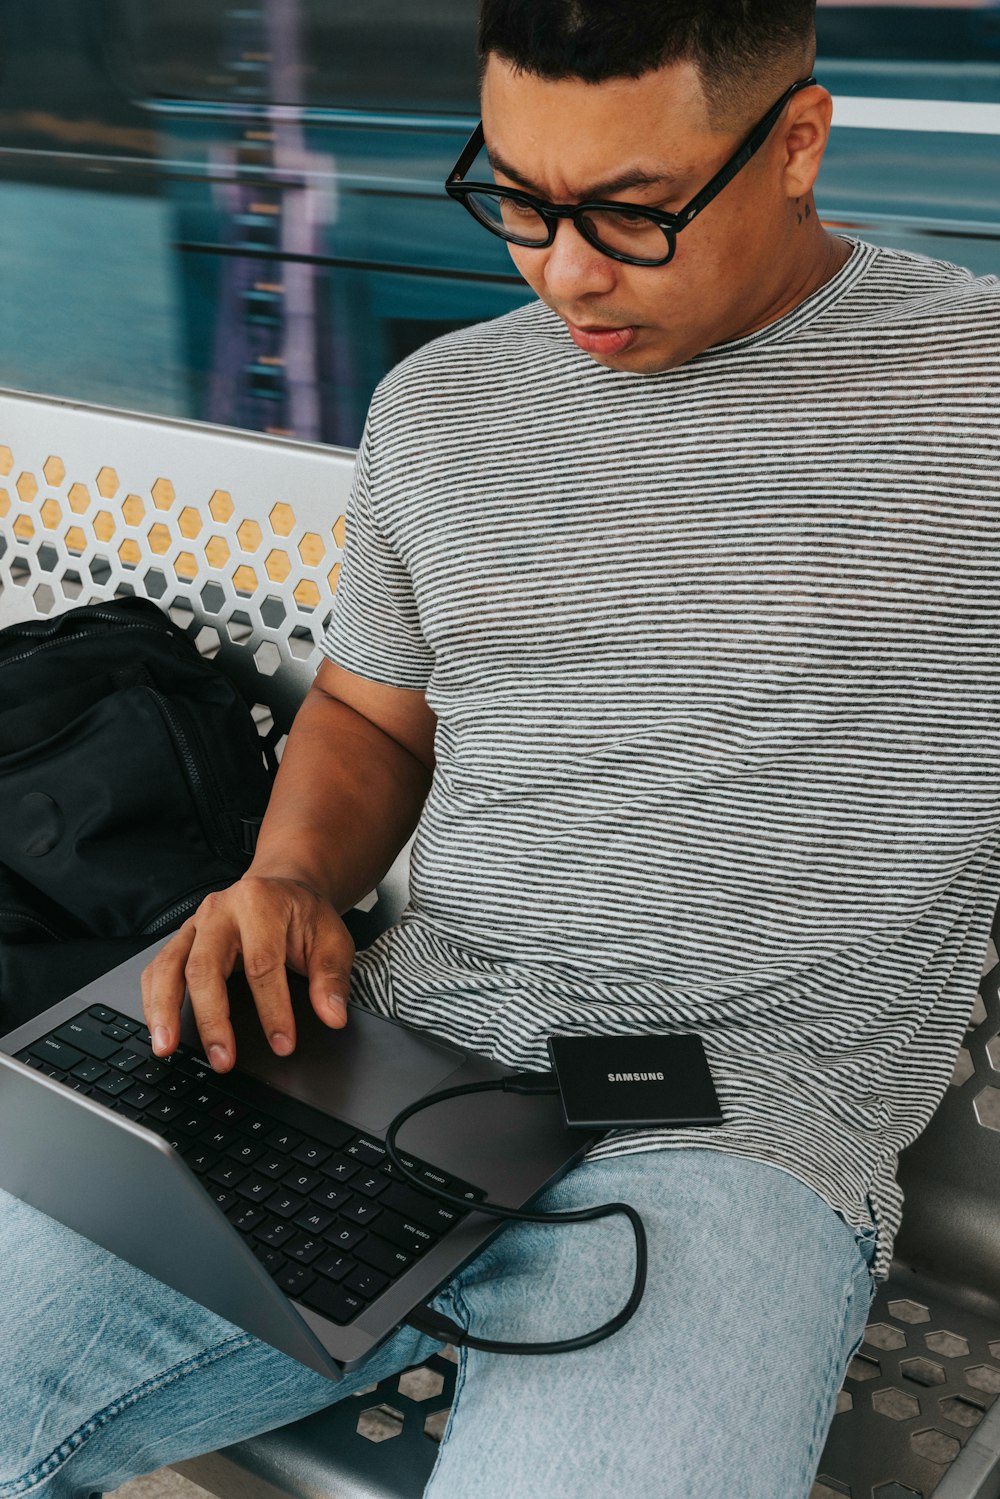 a man sitting on a bench with a laptop